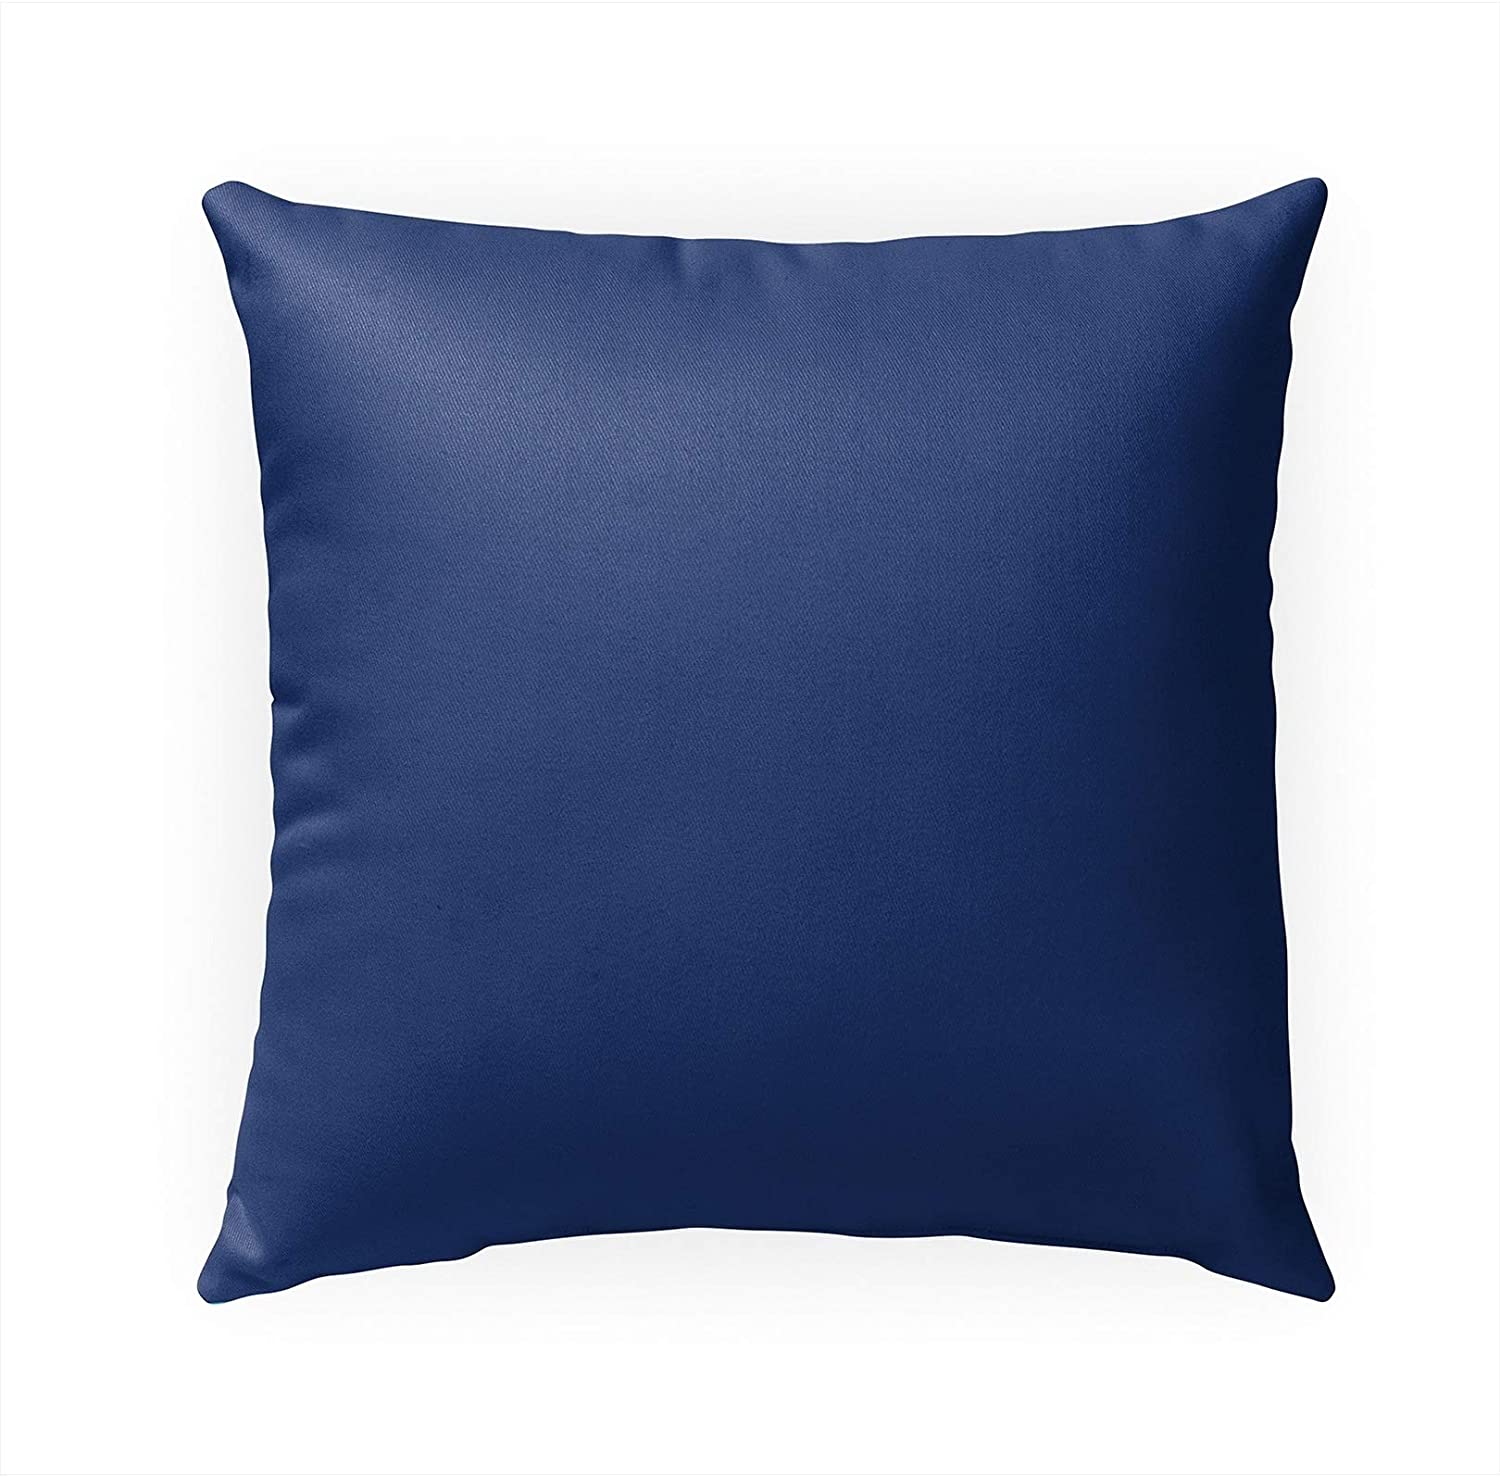 Navy Dream Indoor|Outdoor Pillow by 18x18 Blue Plaid Modern Contemporary Polyester Removable Cover